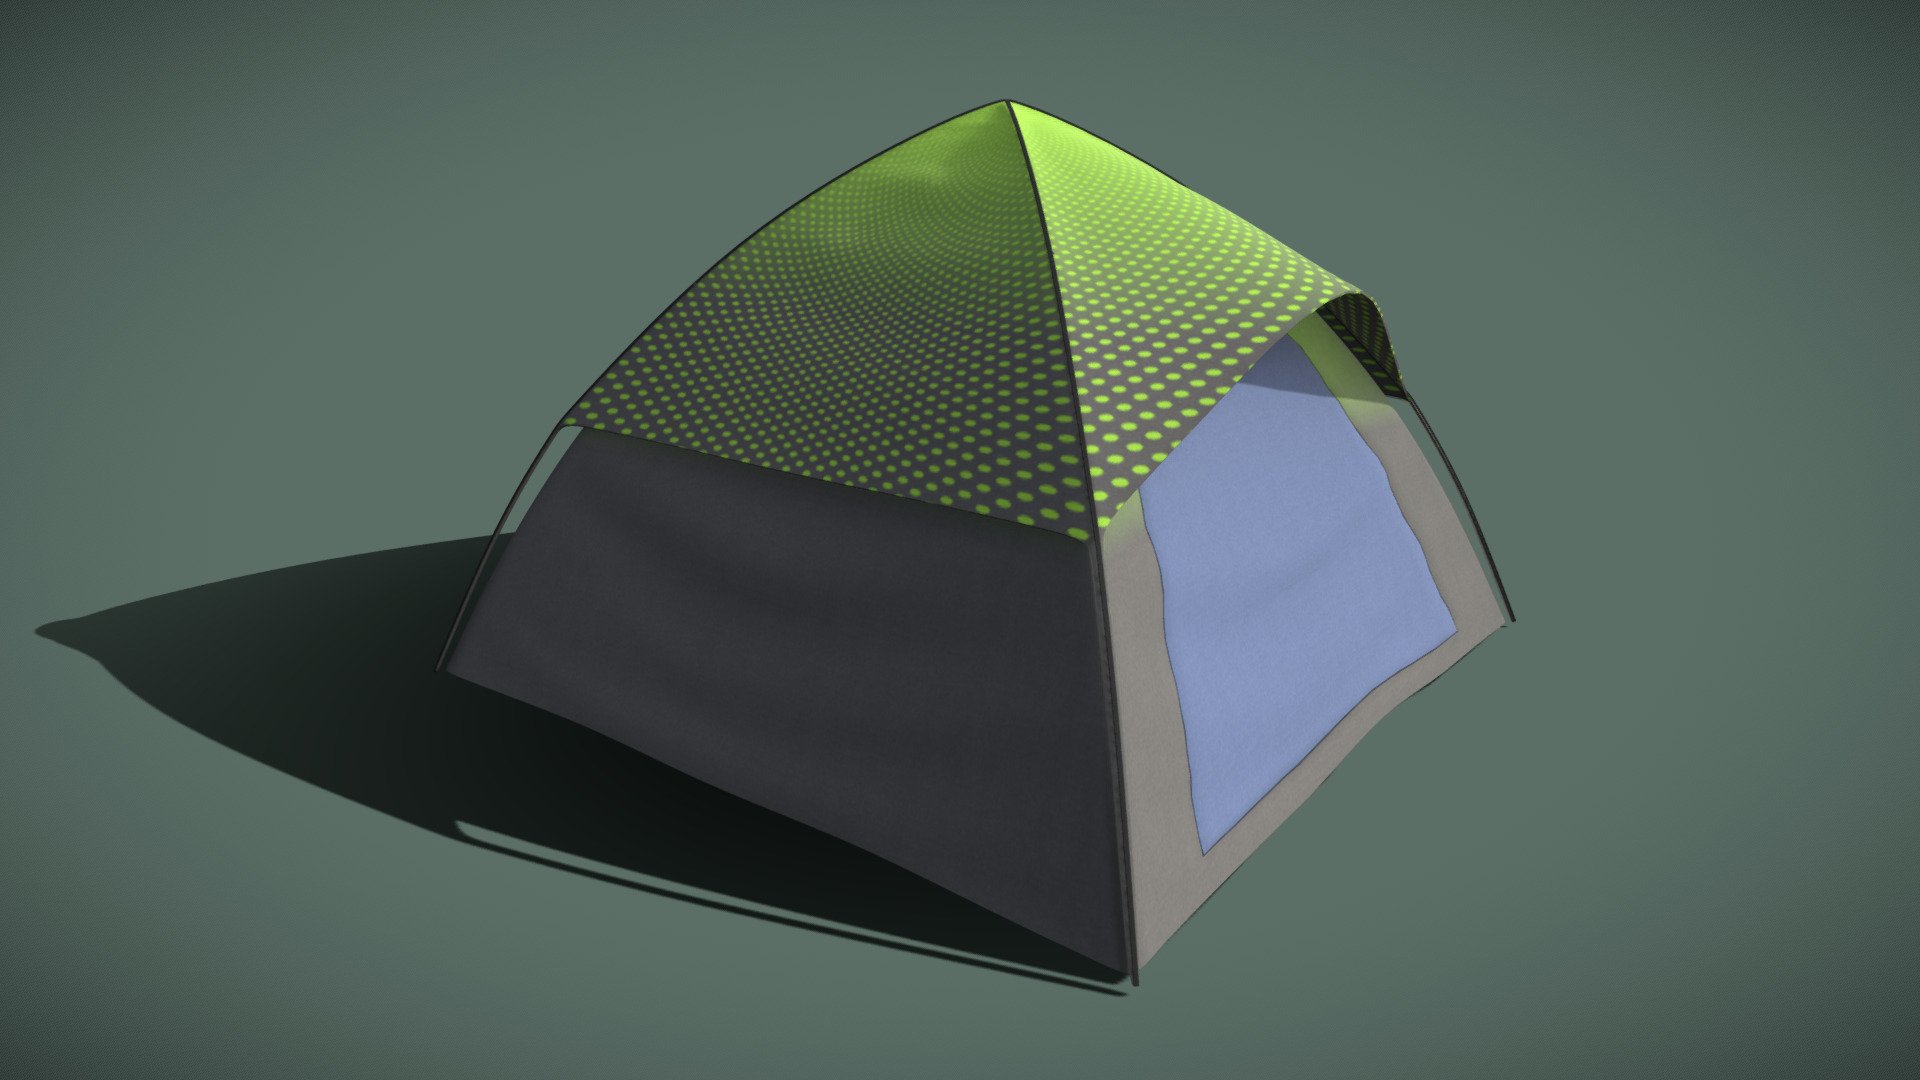 A highpoly camping tent
Model details:




PBR metallic roughness textures

texture resolution : 1k (1024 x 1024)

AO maps : YES

Non-overlapping UVs : YES

Rigged : NO

Highpoly triangulated mesh

Subdivision-ready : NO

Tris : 35,880

Normal map format : OpenGL
 - Camping tent - Download Free 3D model by Blarb 3d model